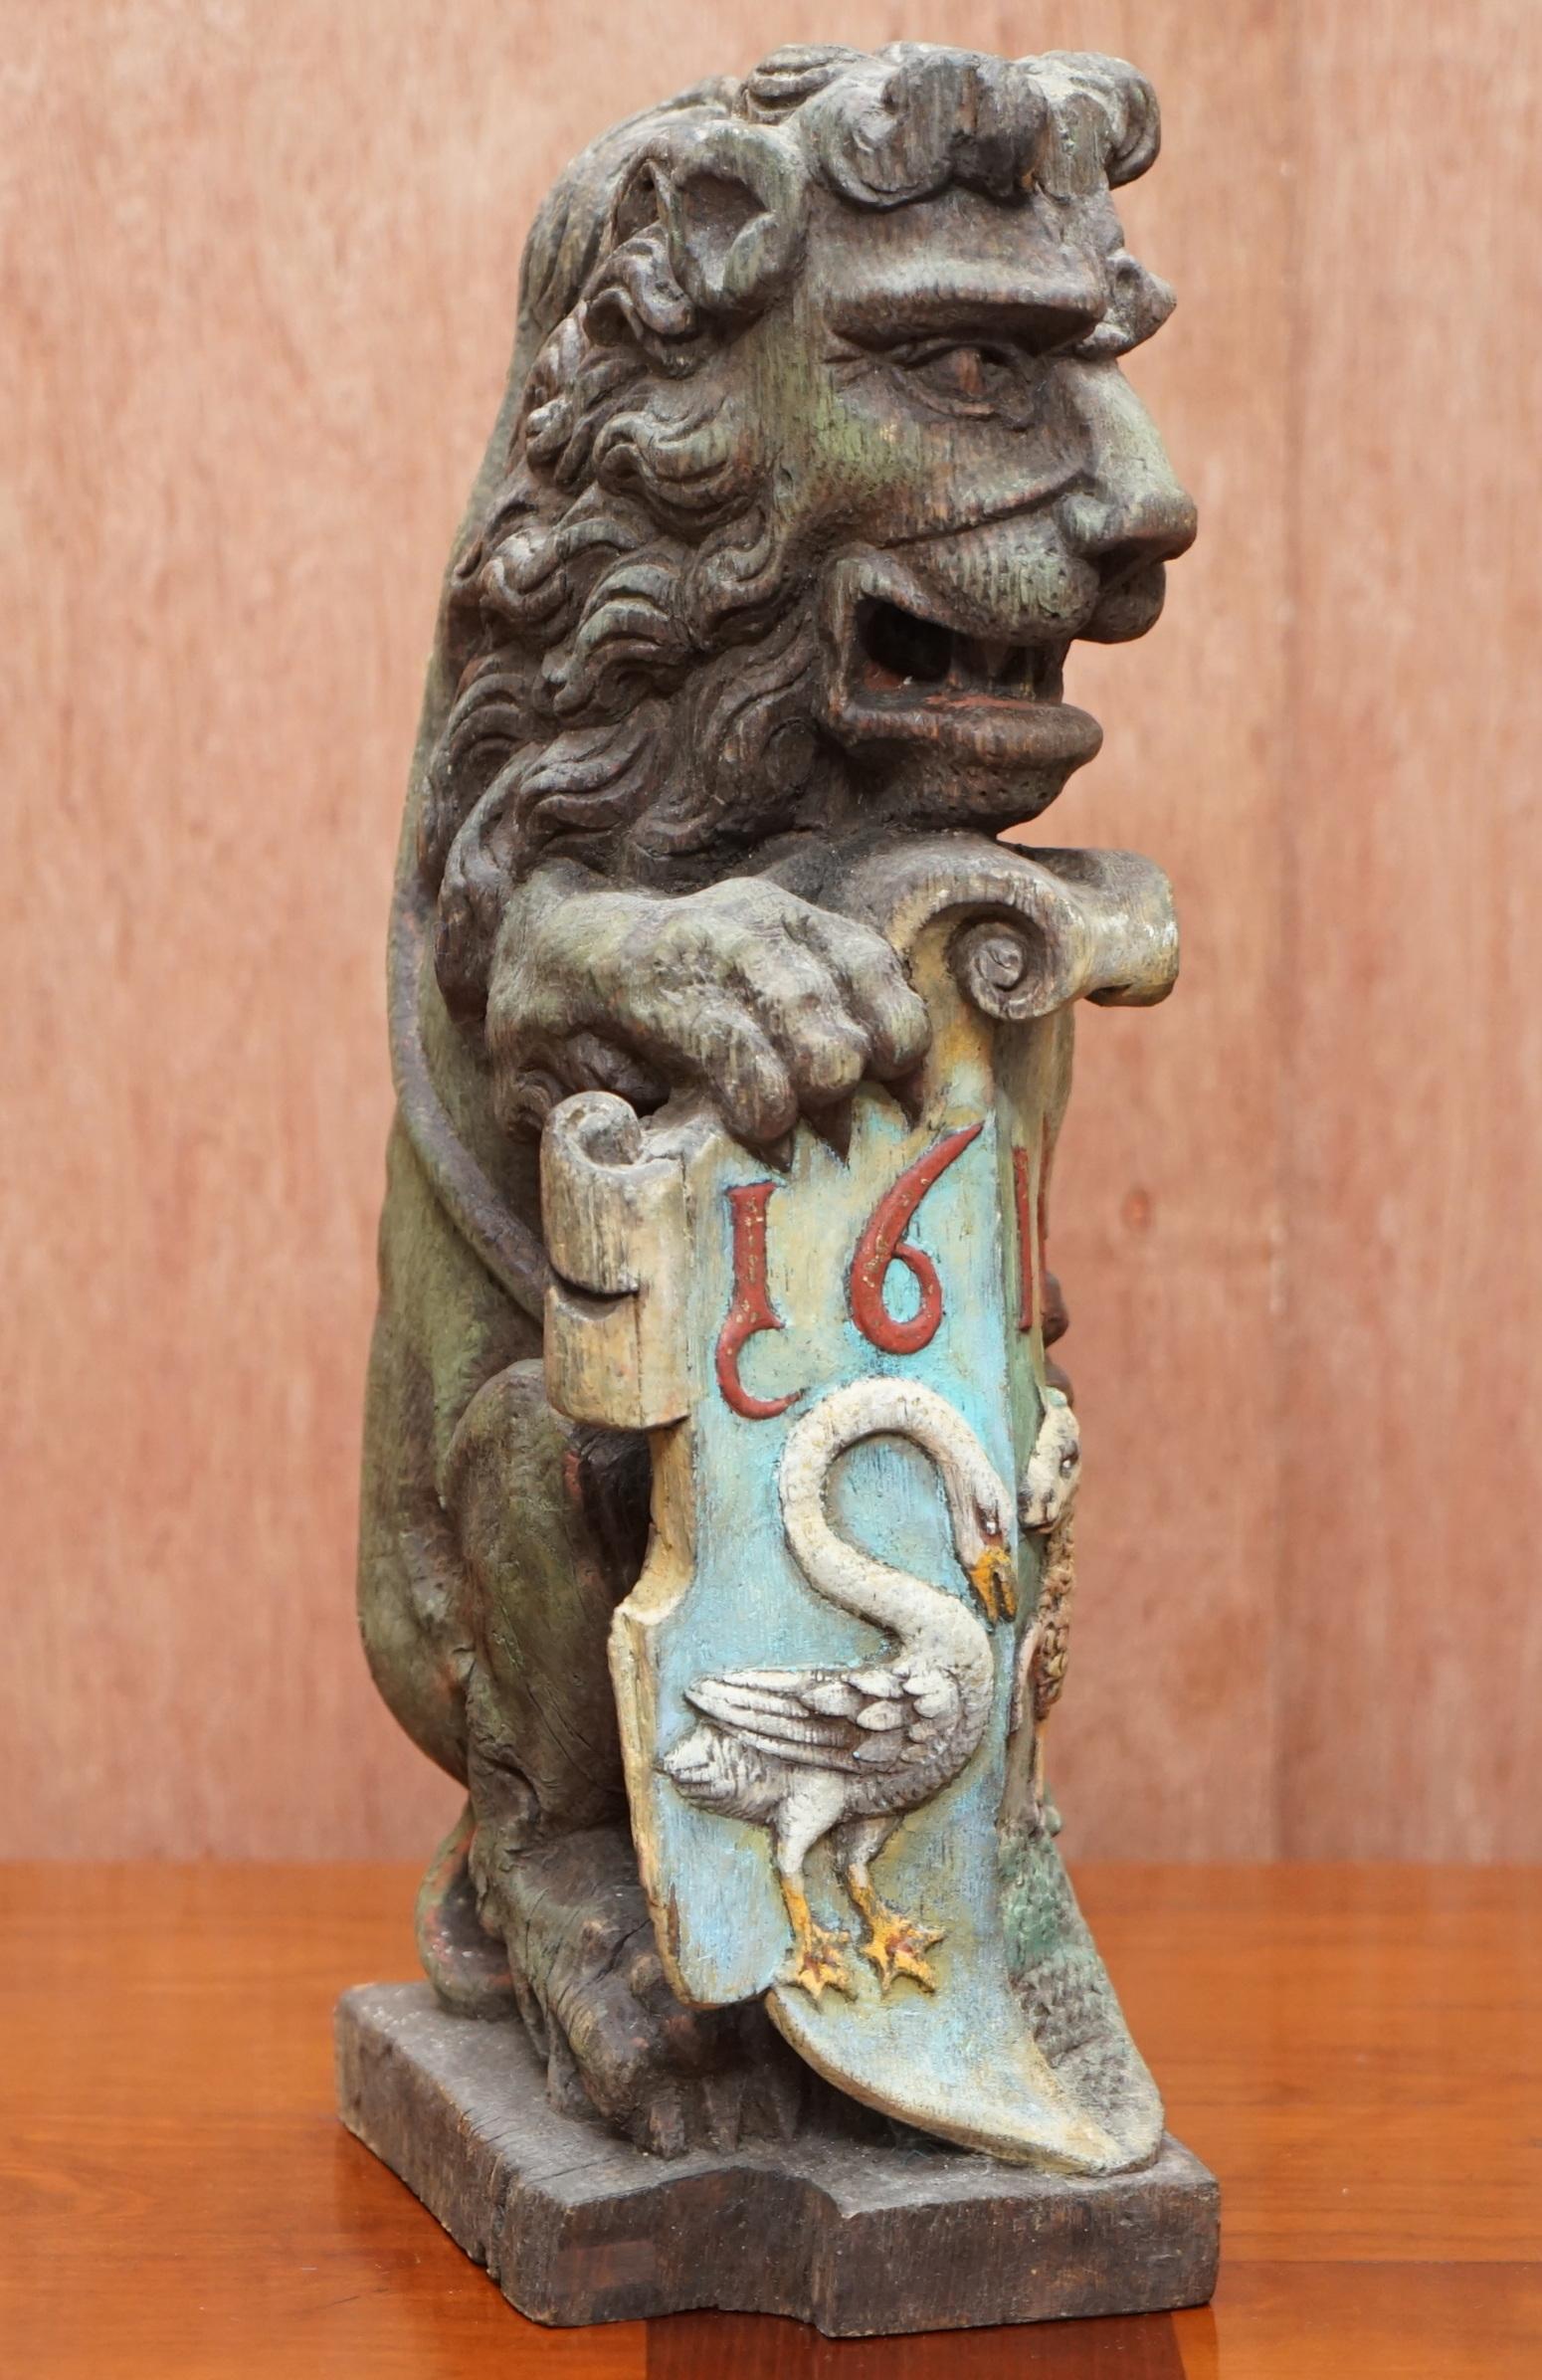 Pair of 1615 English Polychrome Painted Heraldic Lion Newel Banisters Finials For Sale 6